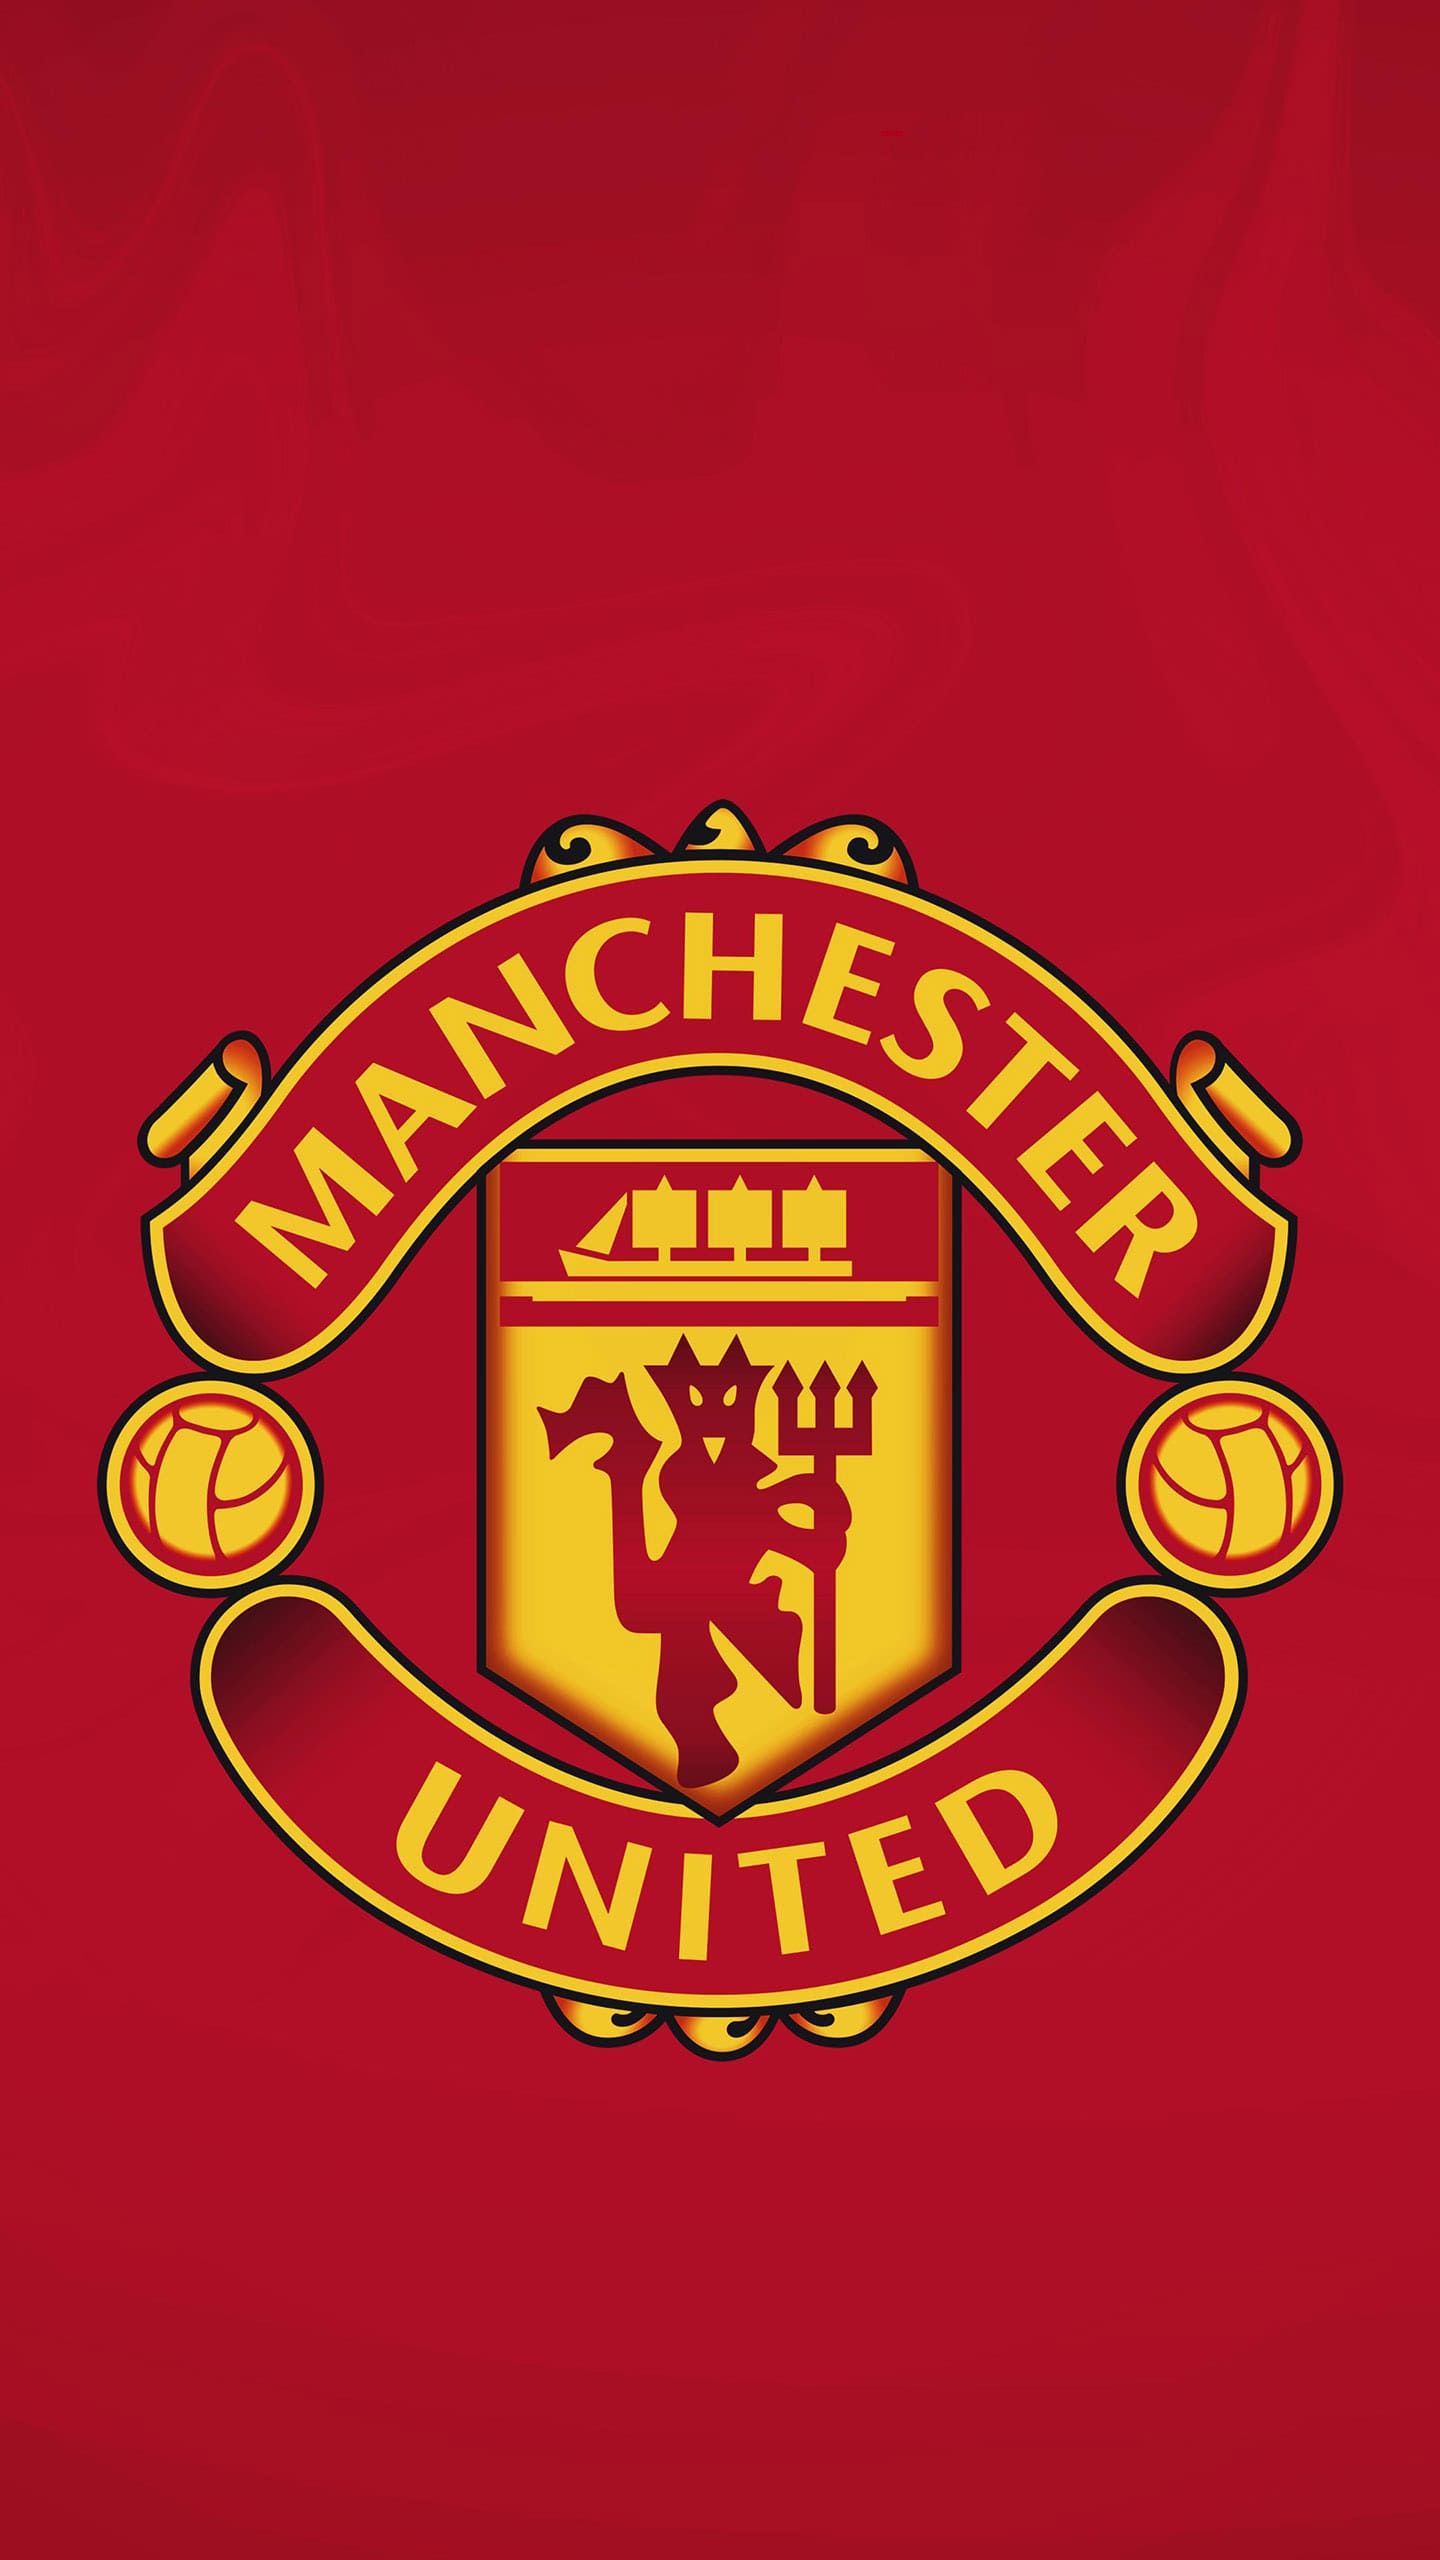 Manchester United Wallpaper Discover more Football, Logo, Manchester United, MANU, MUFC wa. Manchester united wallpaper, Manchester united, Manchester united logo